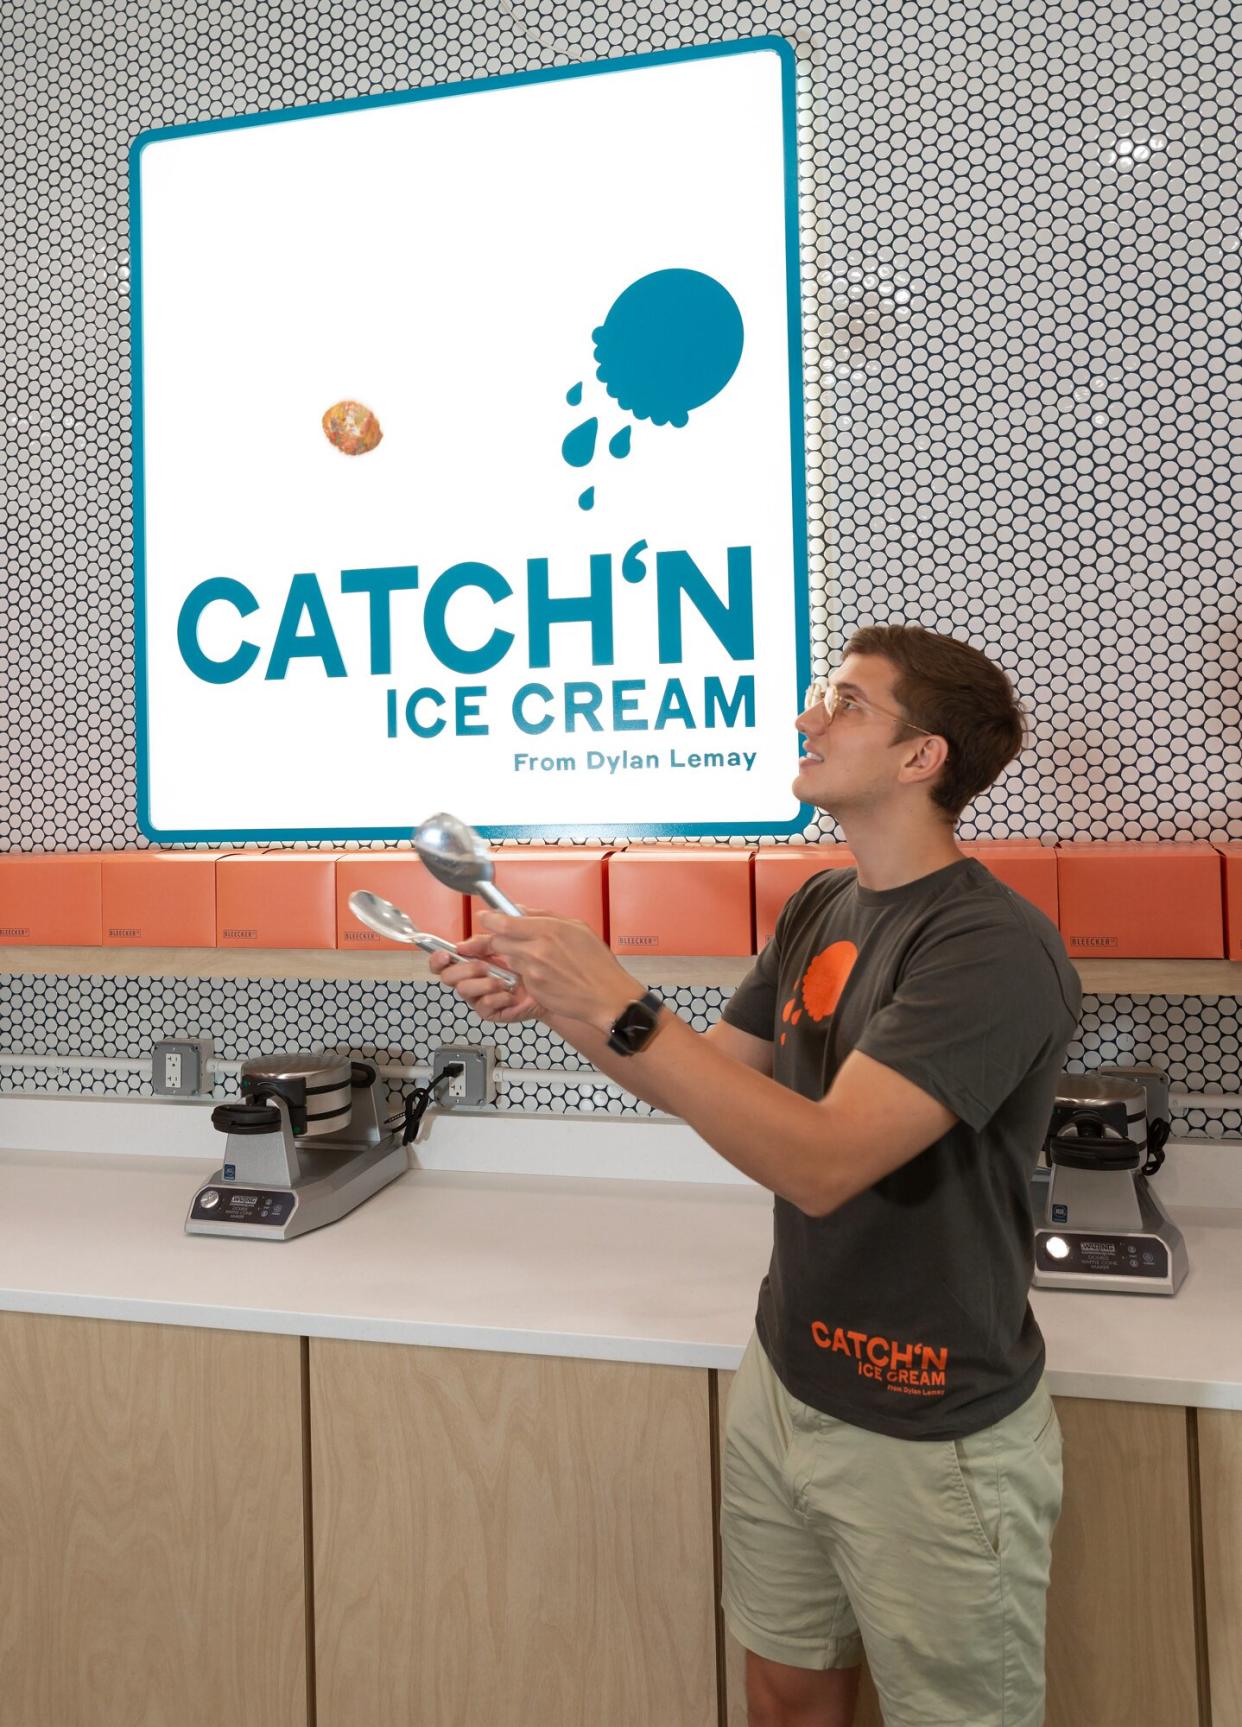 Dylan Lemay's new ice cream shop